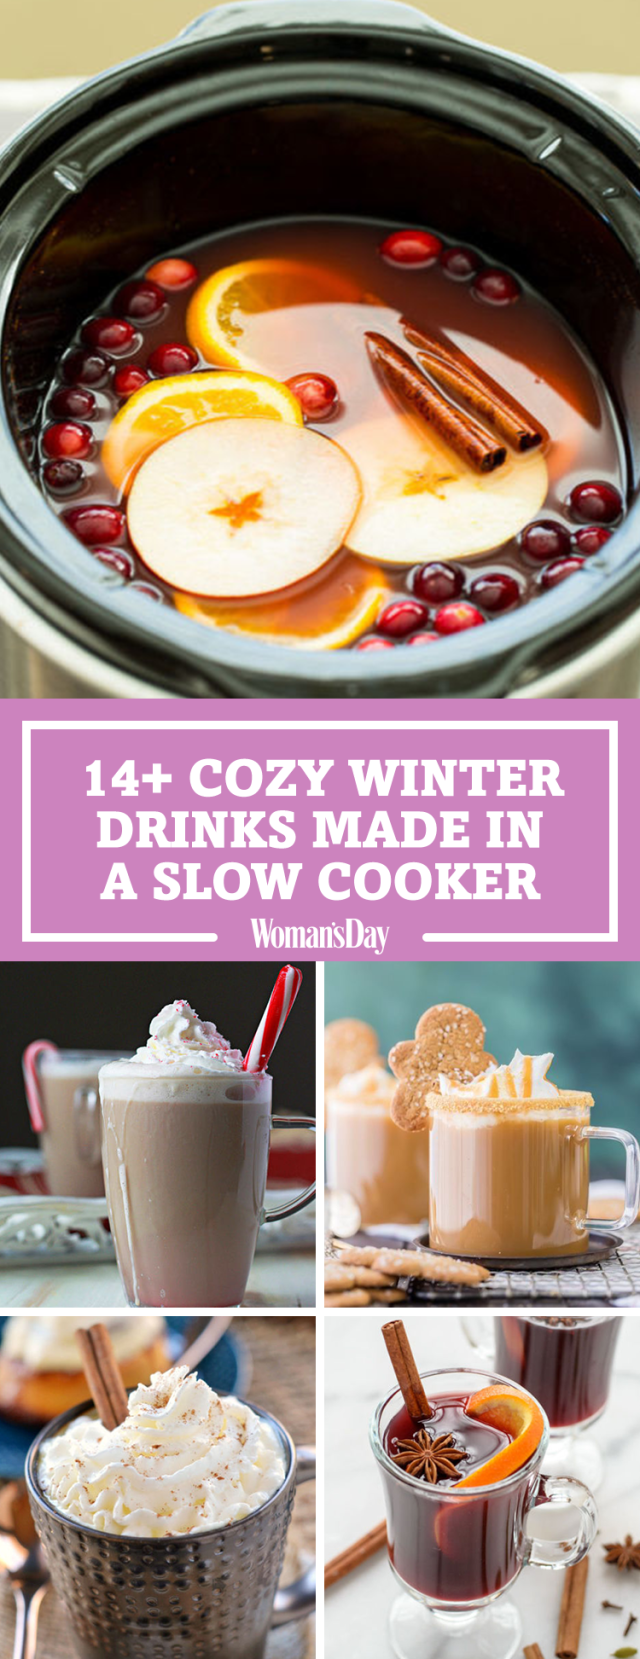 https://hips.hearstapps.com/wdy.h-cdn.co/assets/16/46/640x1659/gallery-1479230493-wd-cozy-winter-slow-cooker-drinks.png?resize=980:*